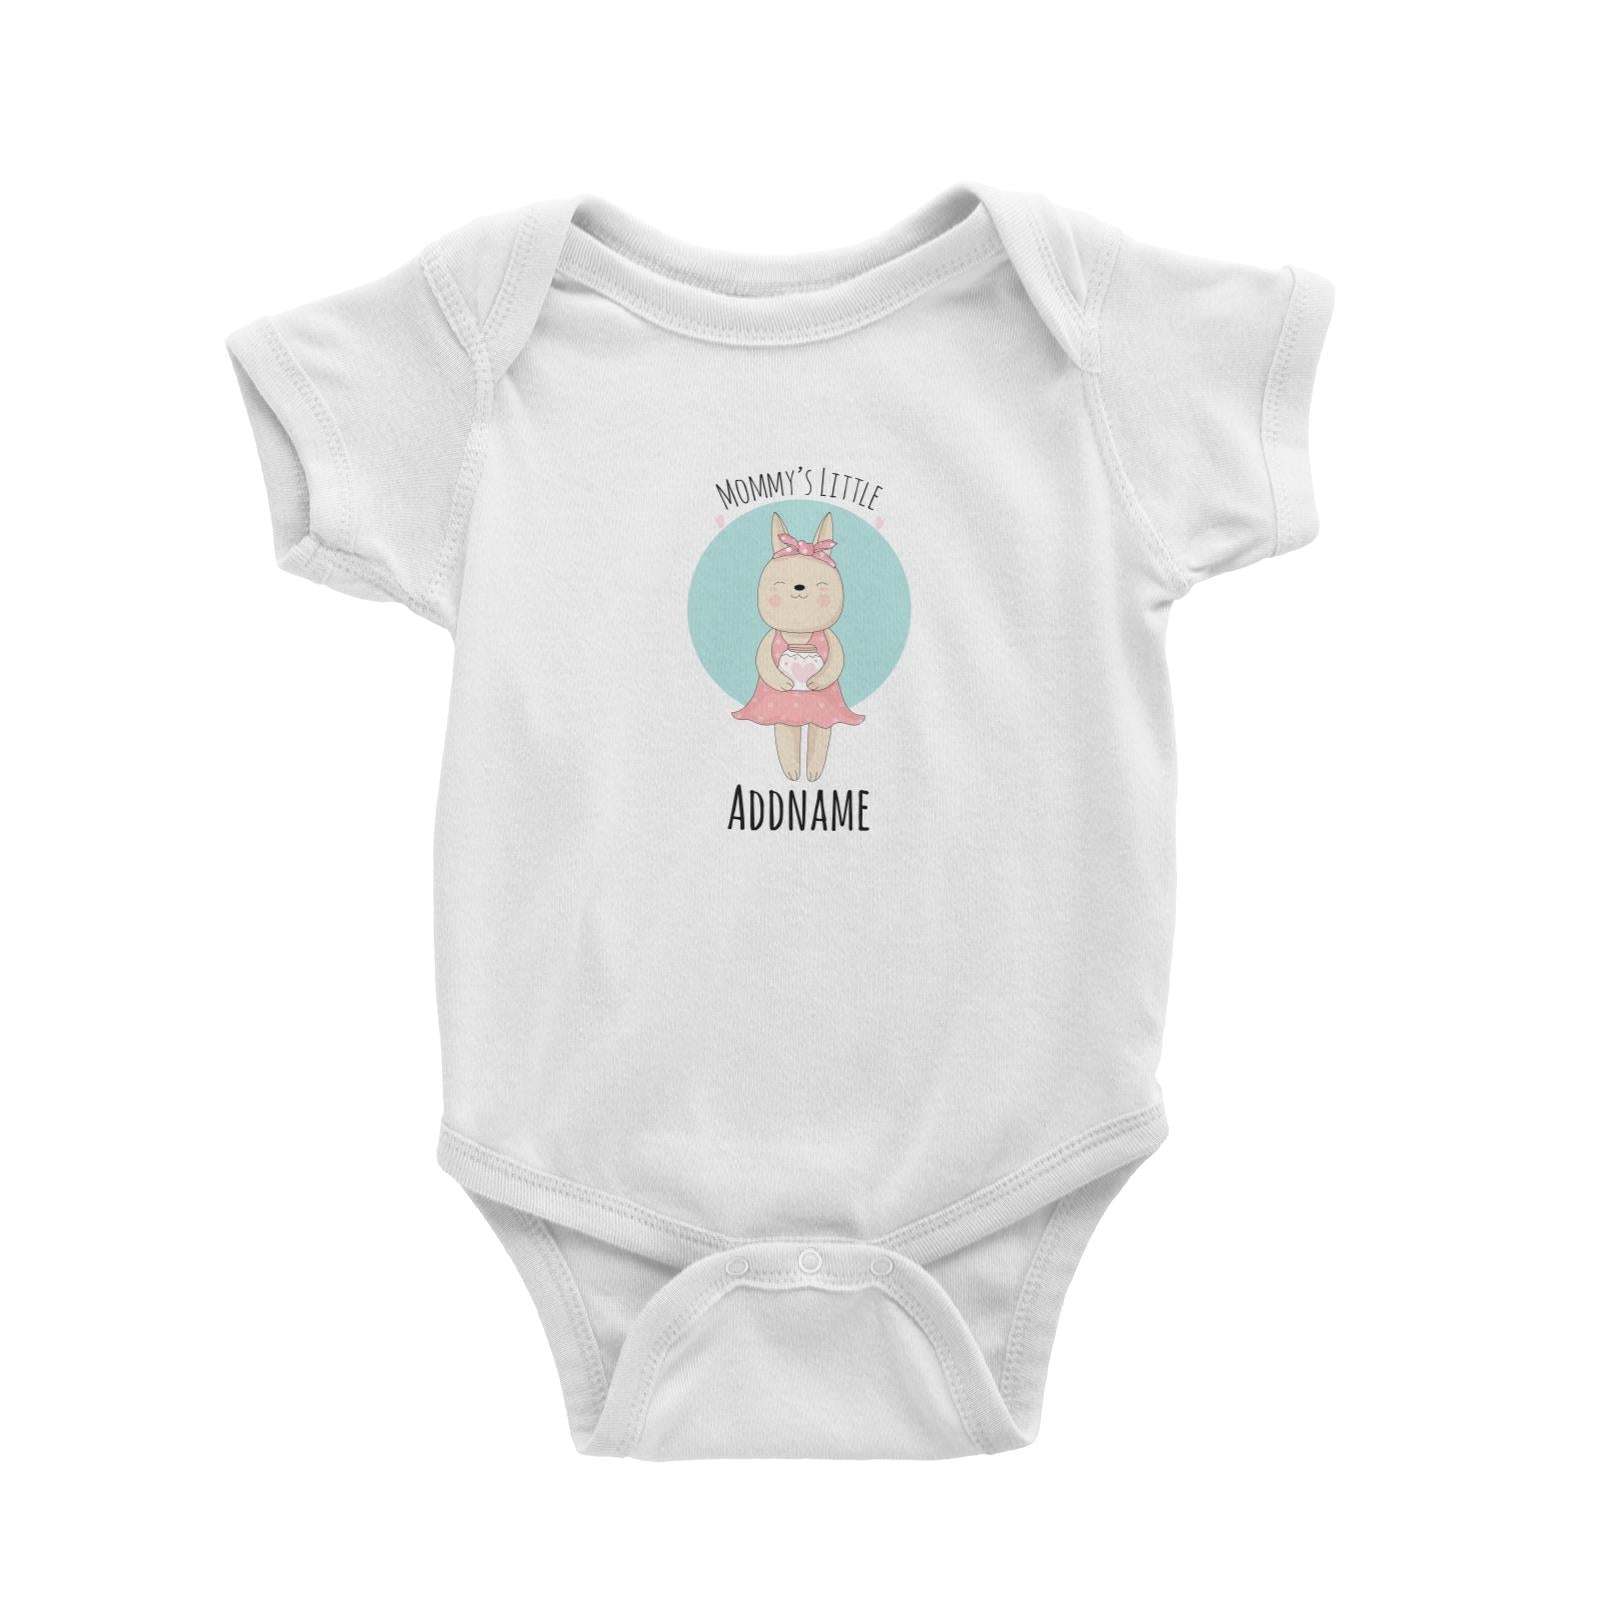 Sweet Animals Sketches Mommy's Little Bunny Addname Baby Romper